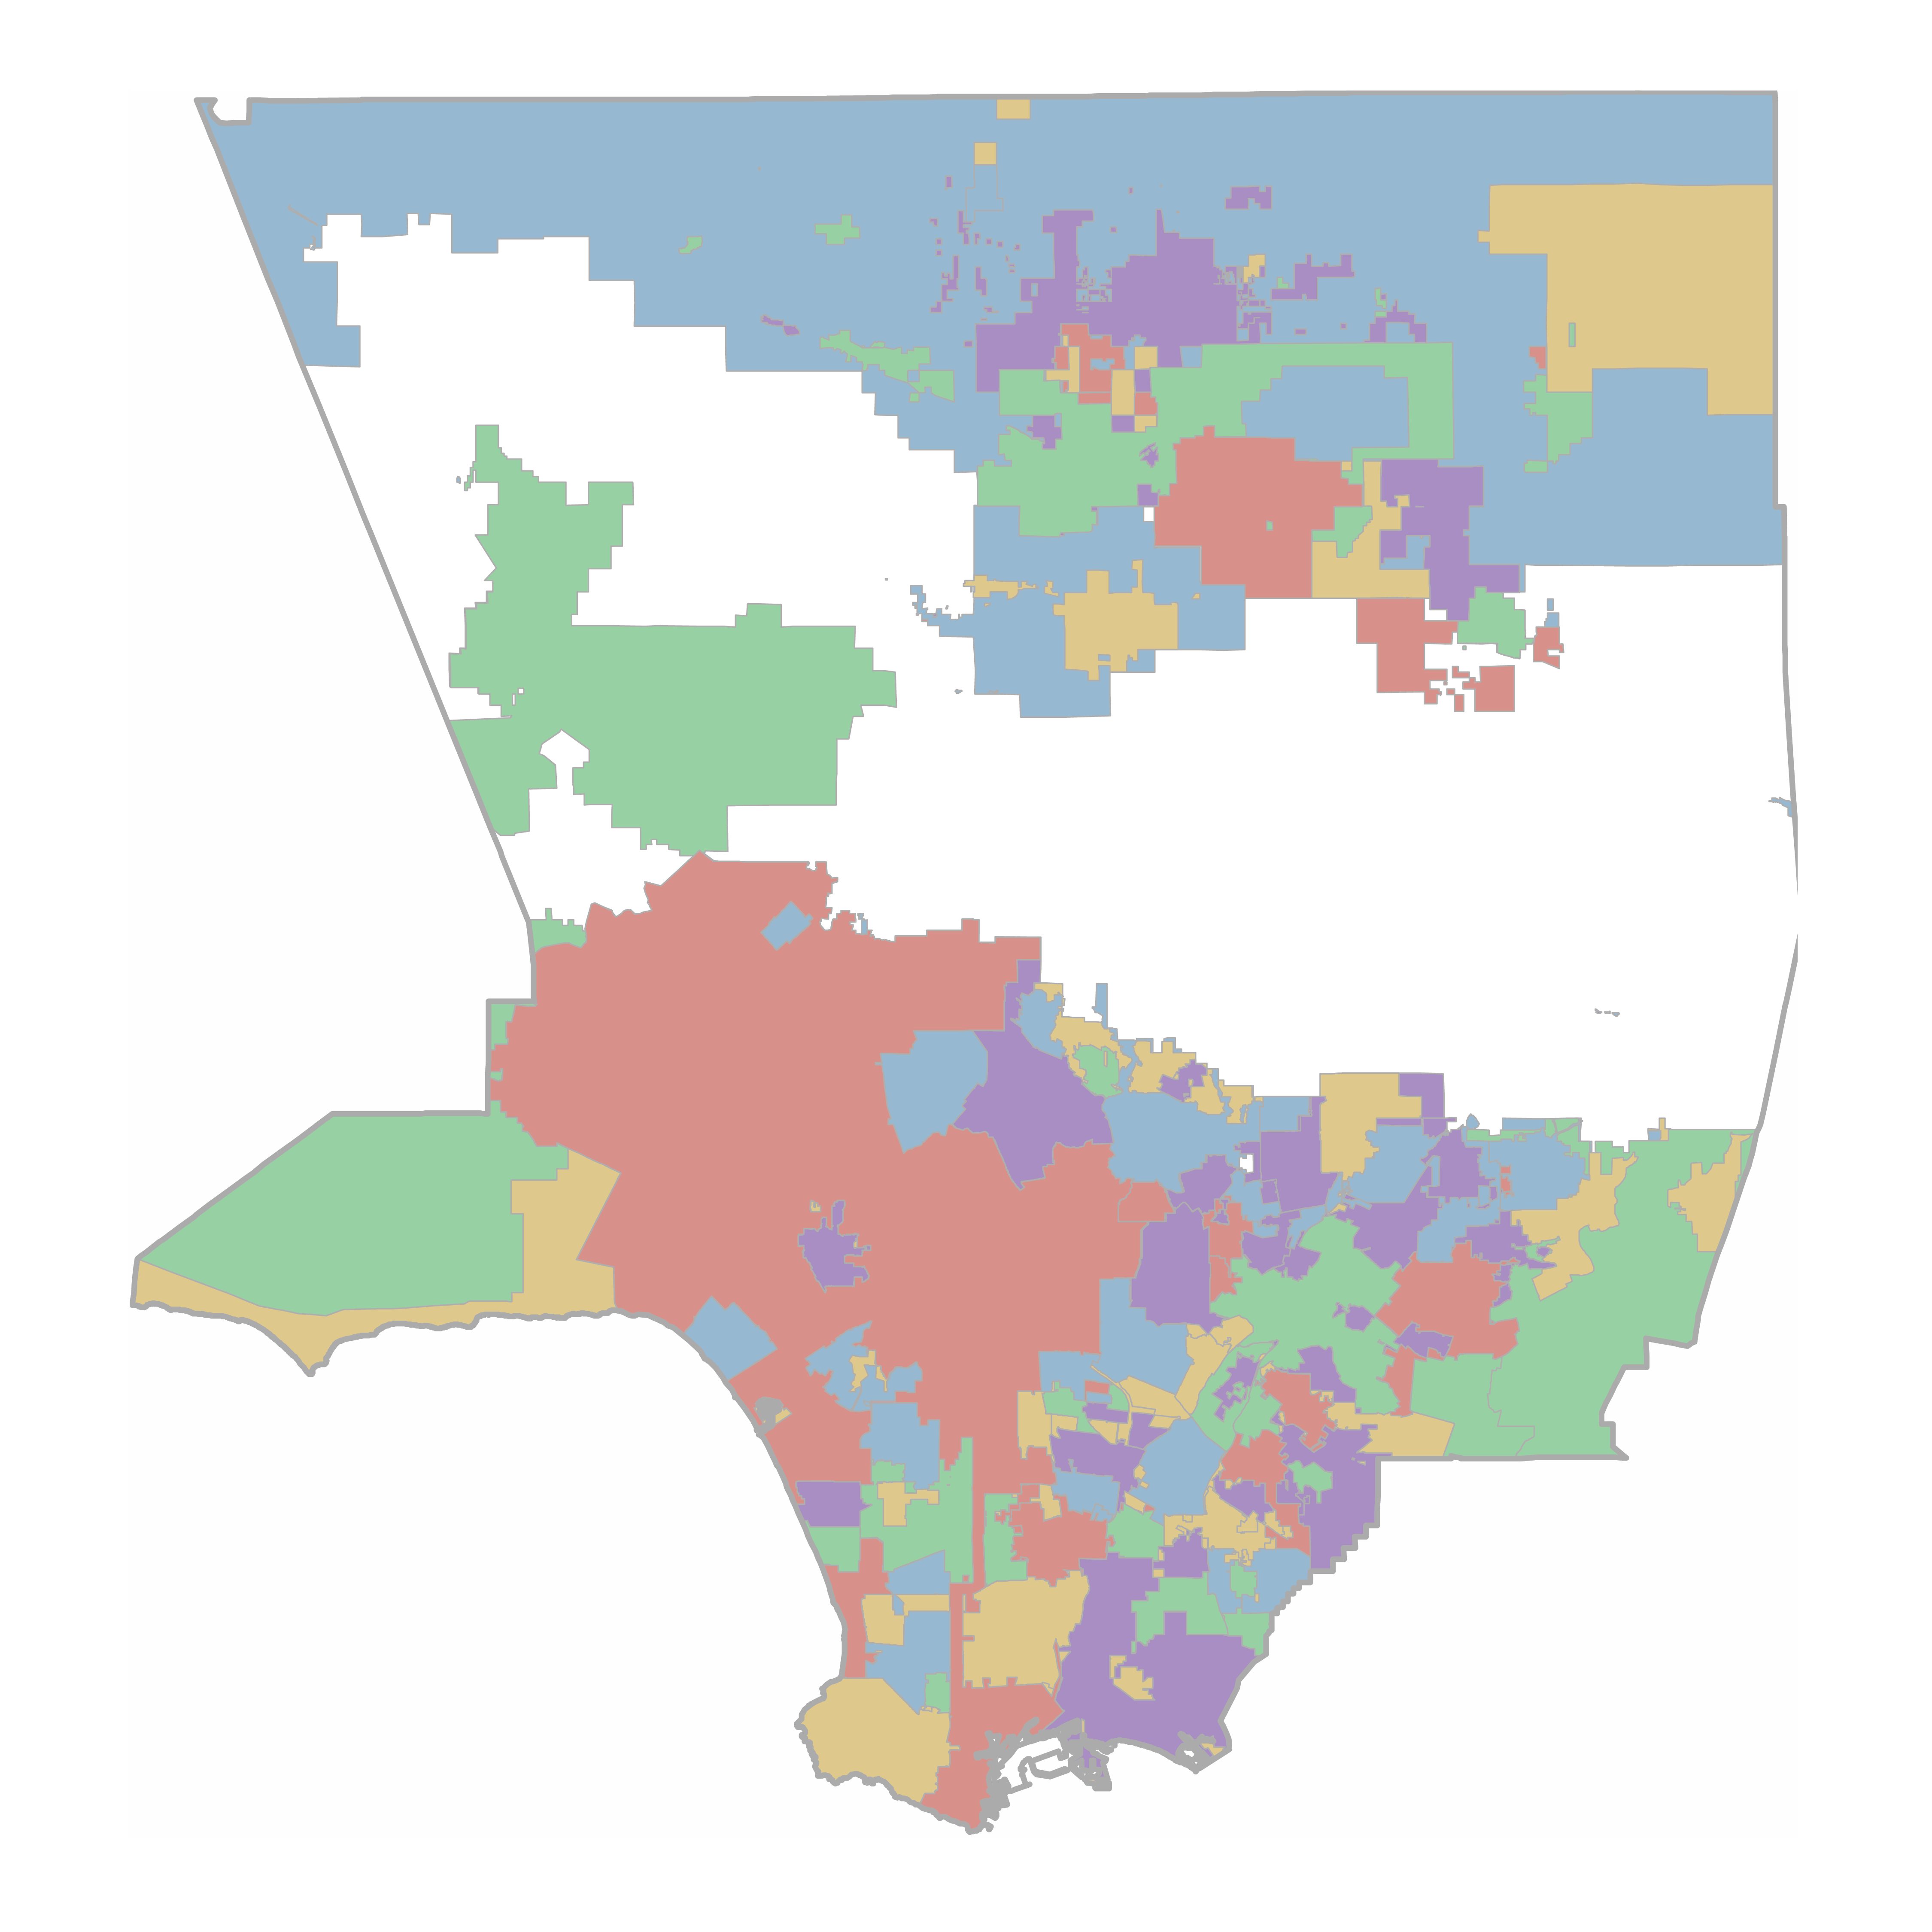 A map of LA county with different areas shaded different colors, representing water purveyors in LA County  